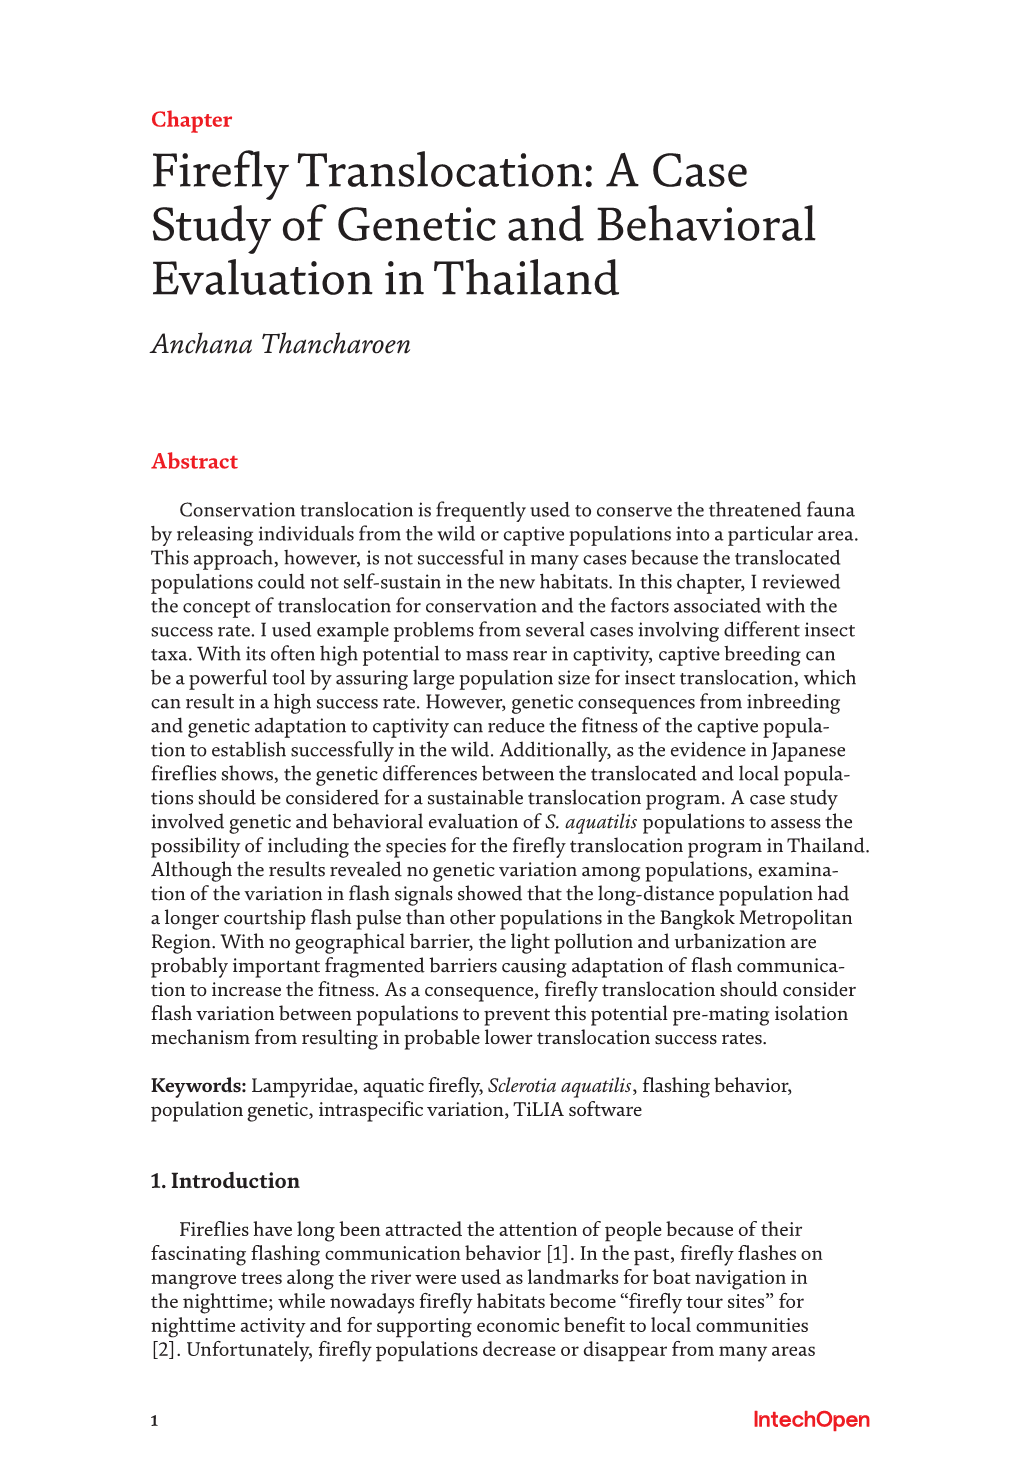 Firefly Translocation: a Case Study of Genetic and Behavioral Evaluation in Thailand Anchana Thancharoen